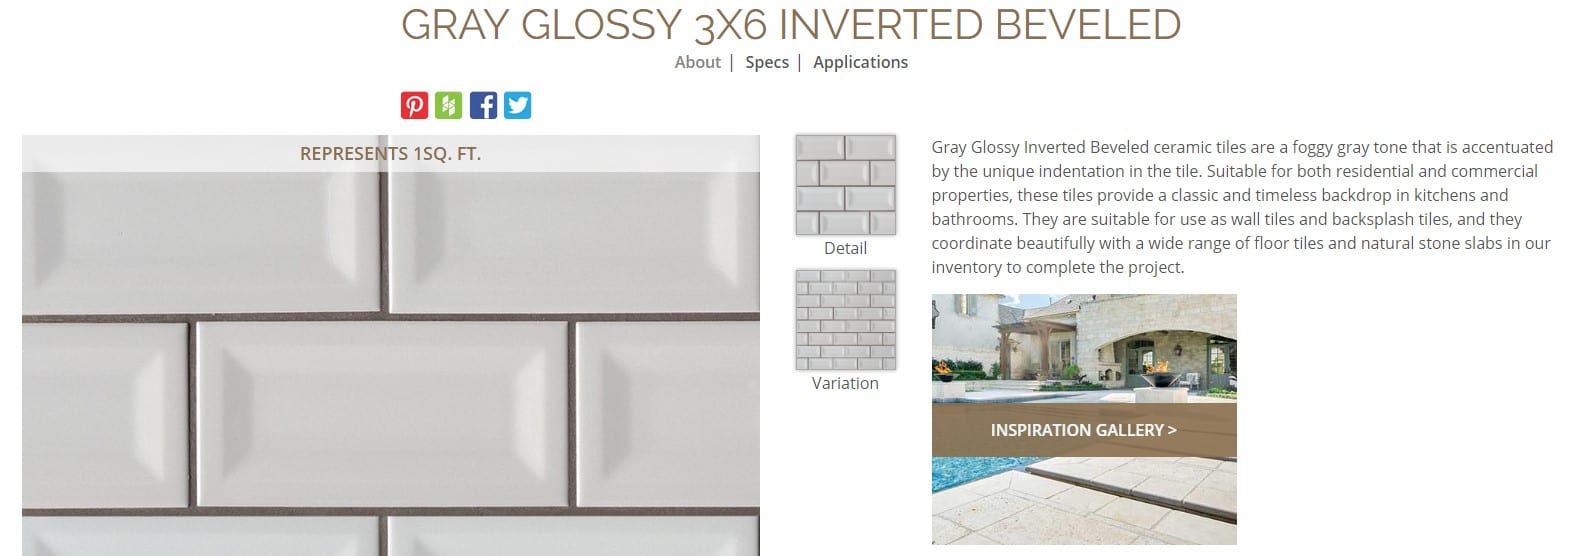 .https://www.msisurfaces.com/domino/gray-glossy-3x6-inverted-beveled/